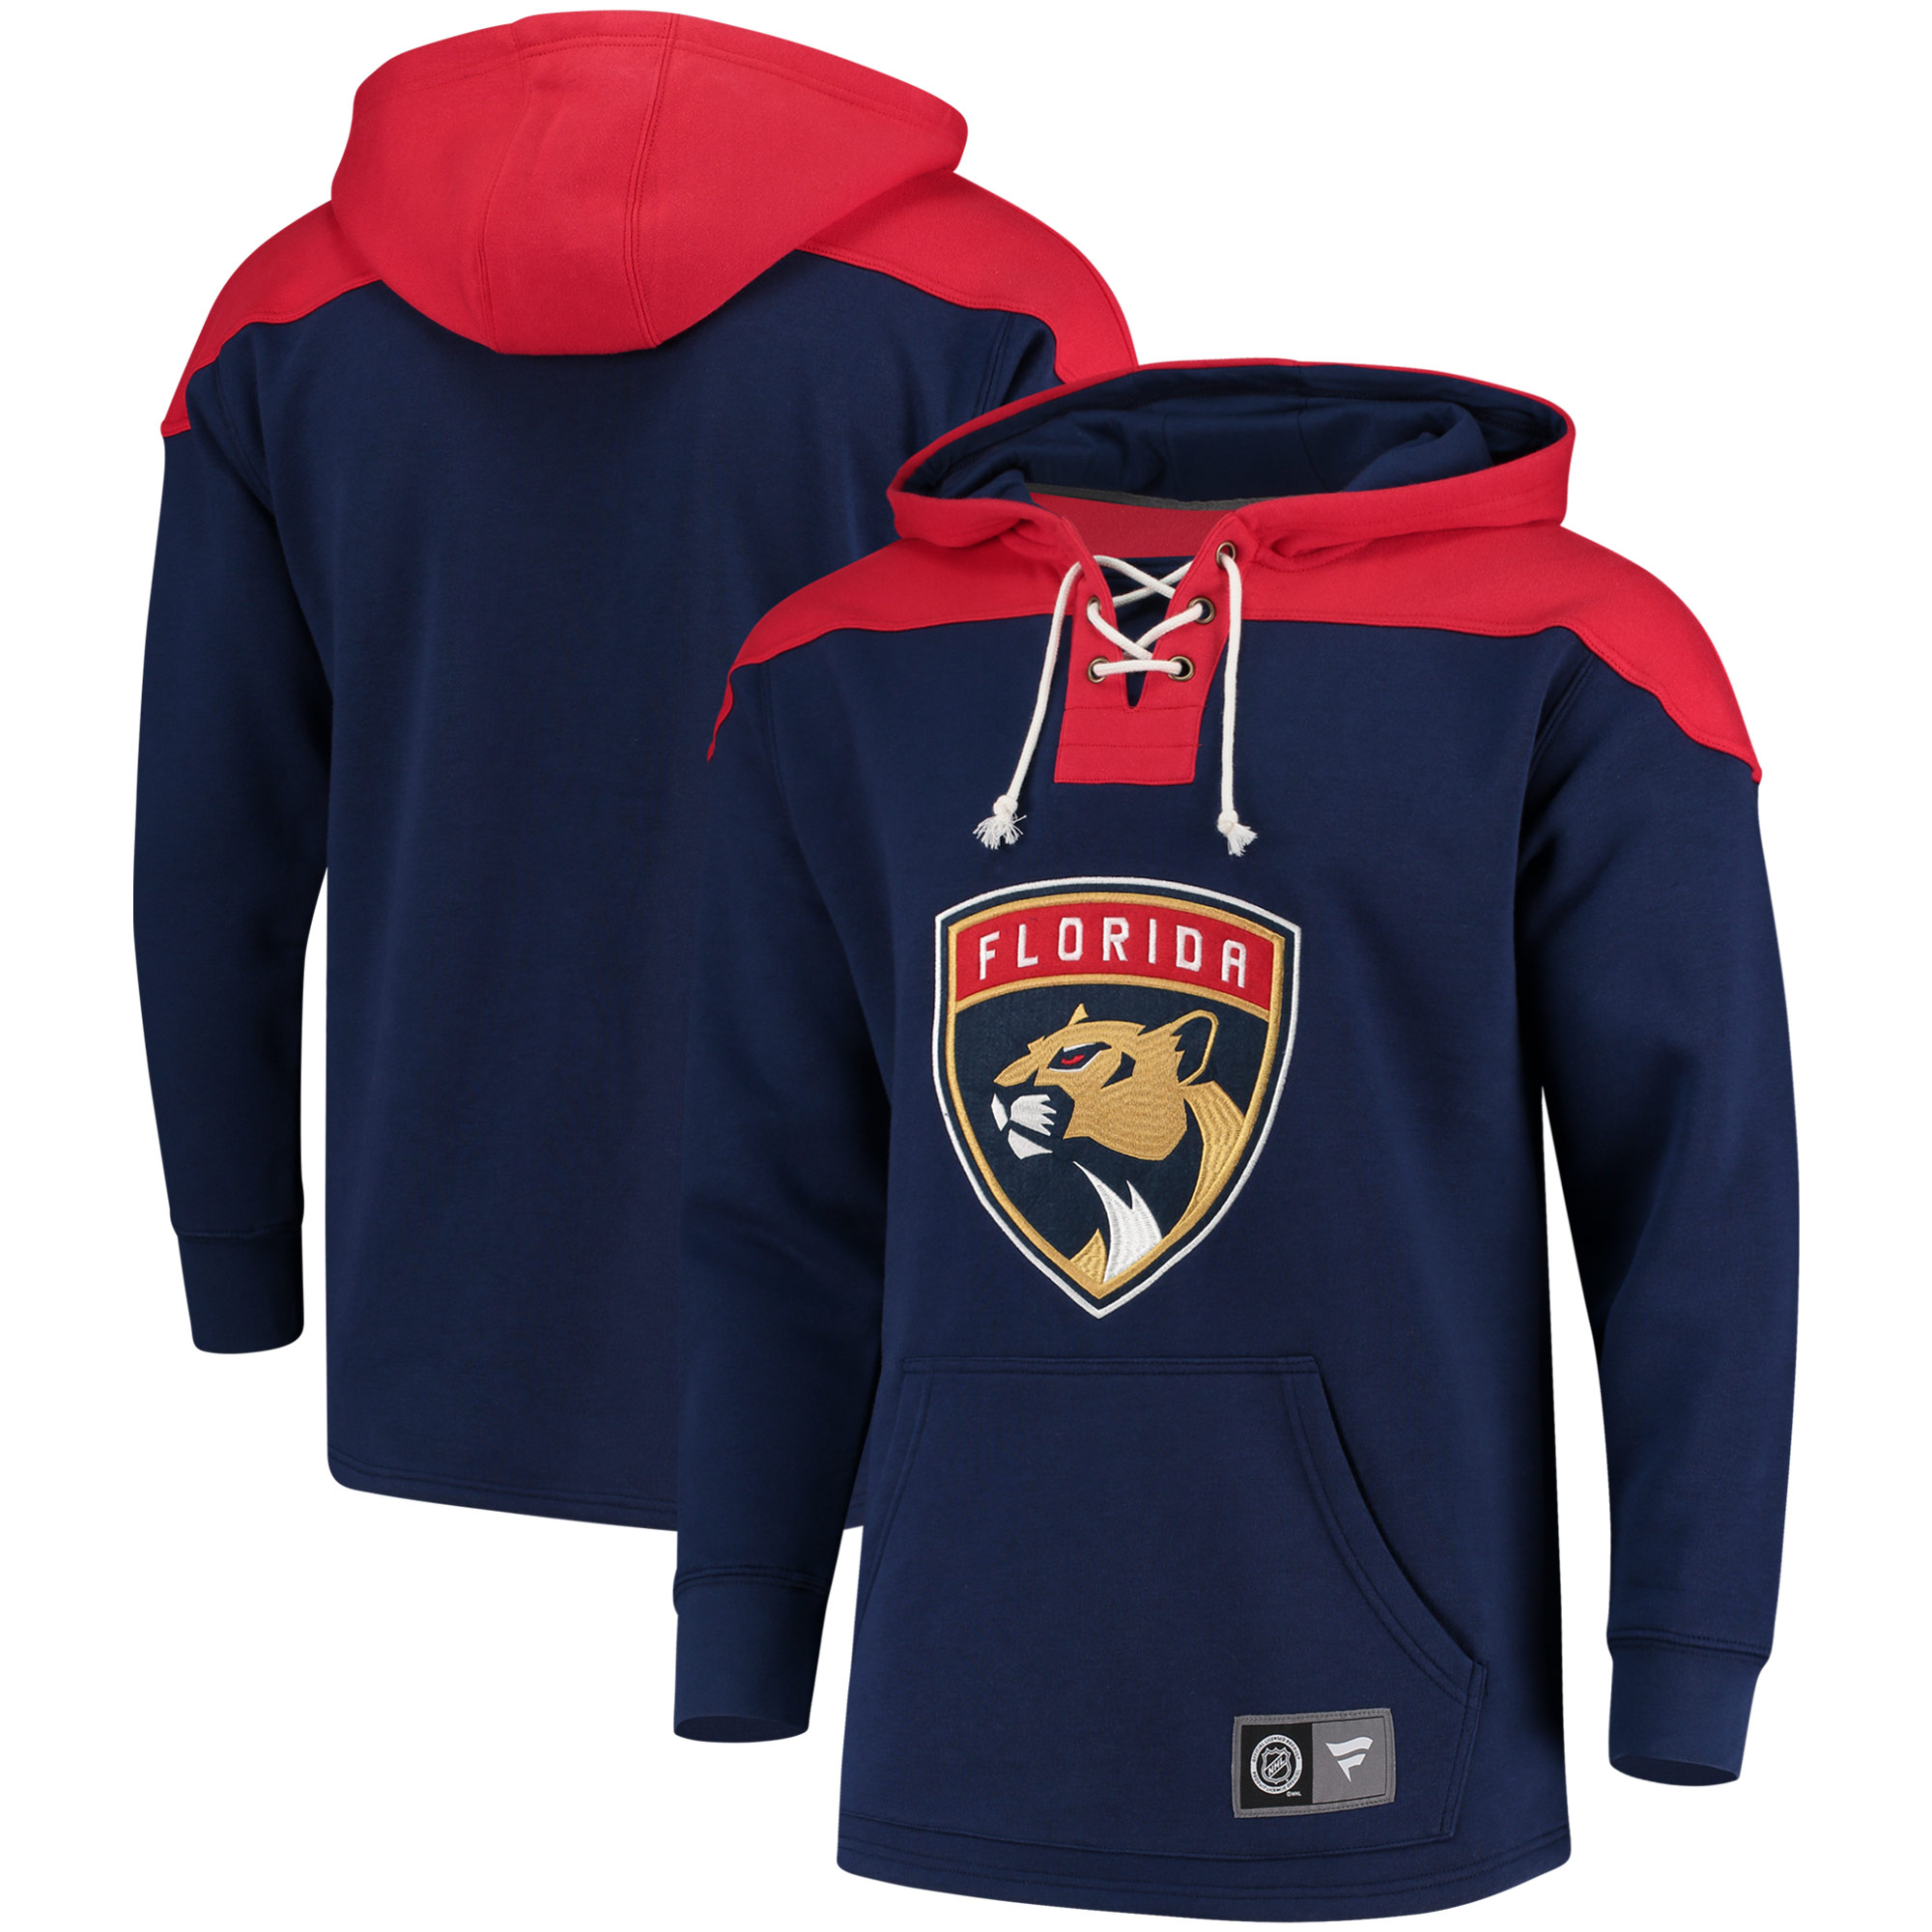 Men's Florida Panthers Fanatics Branded Navy/Red Breakaway Lace Up Hoodie